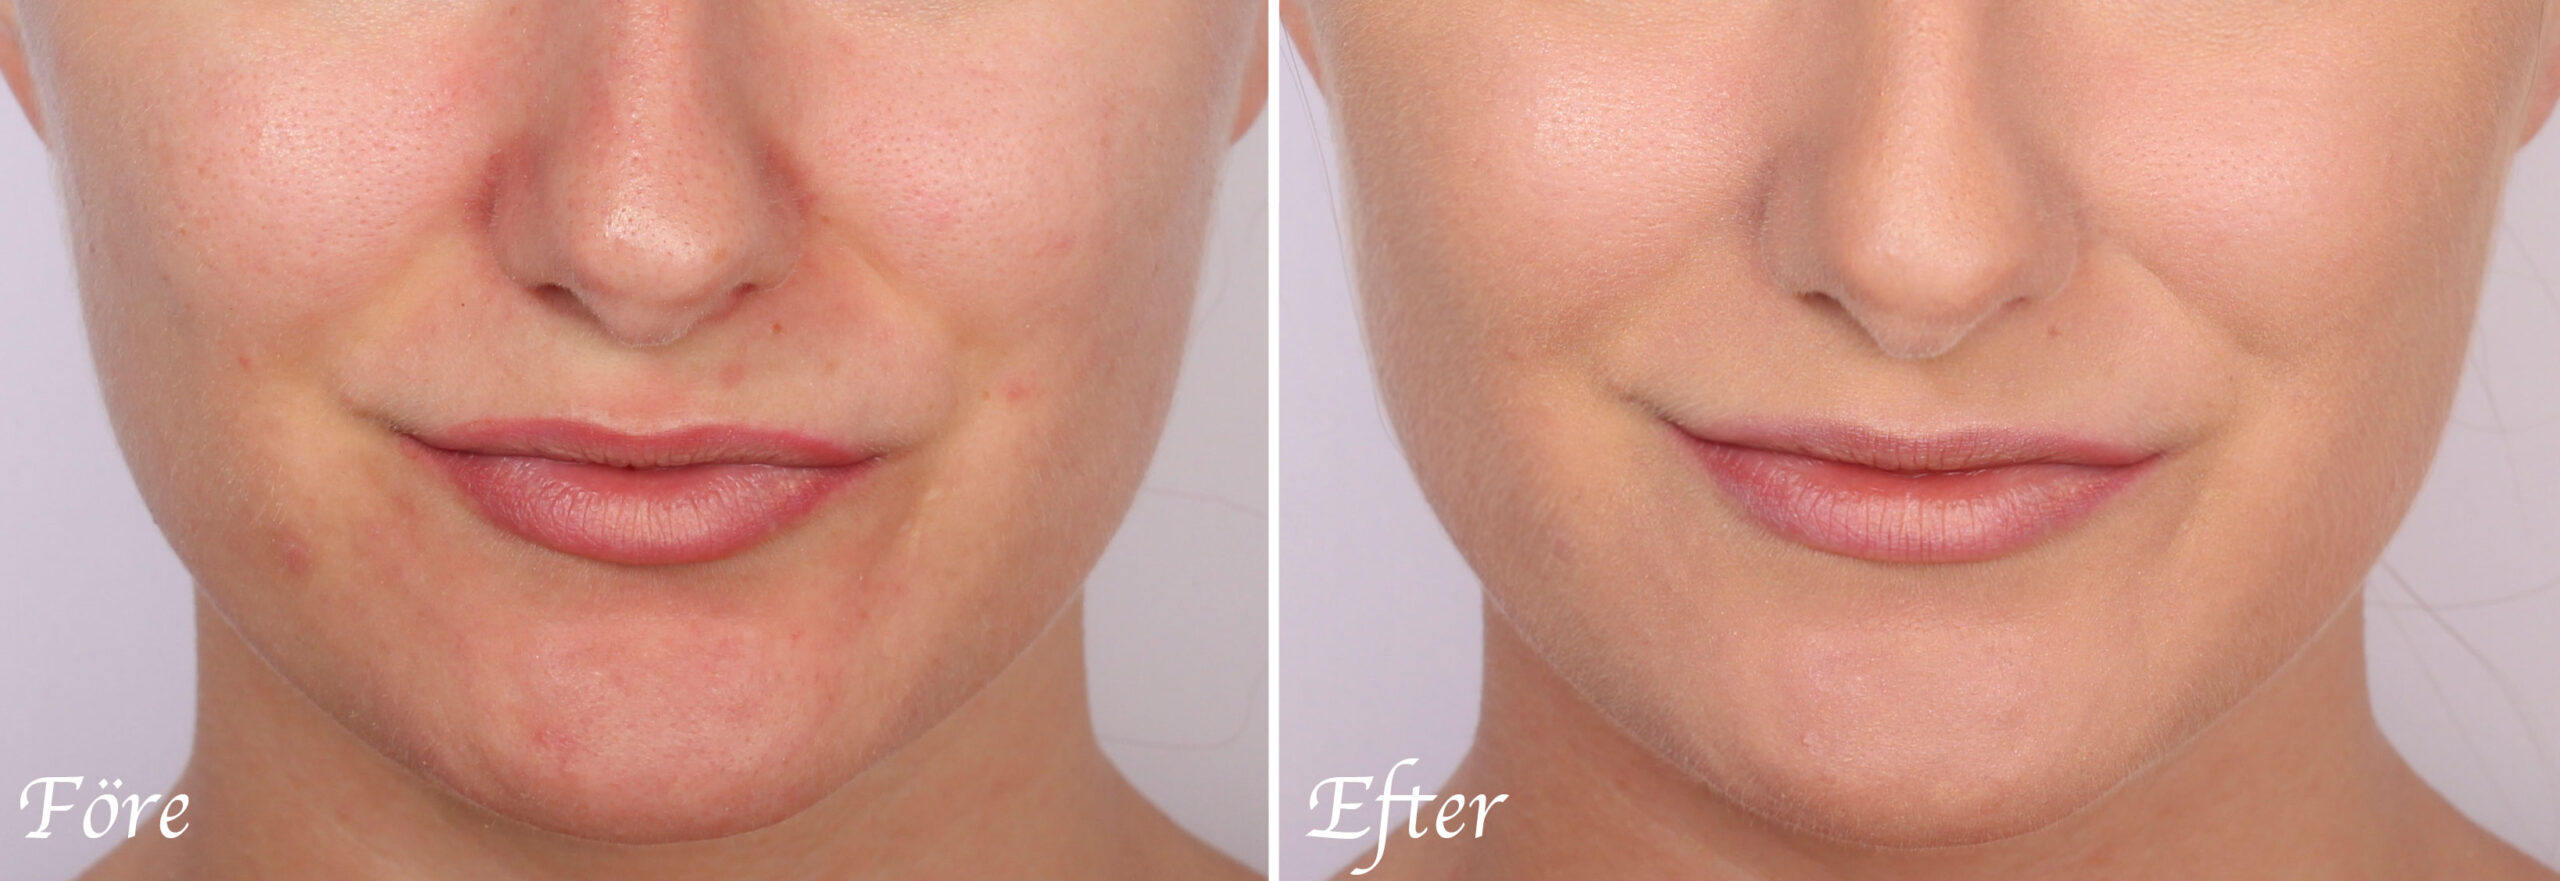 make-up-away-red-areas-in-the-face-before-after